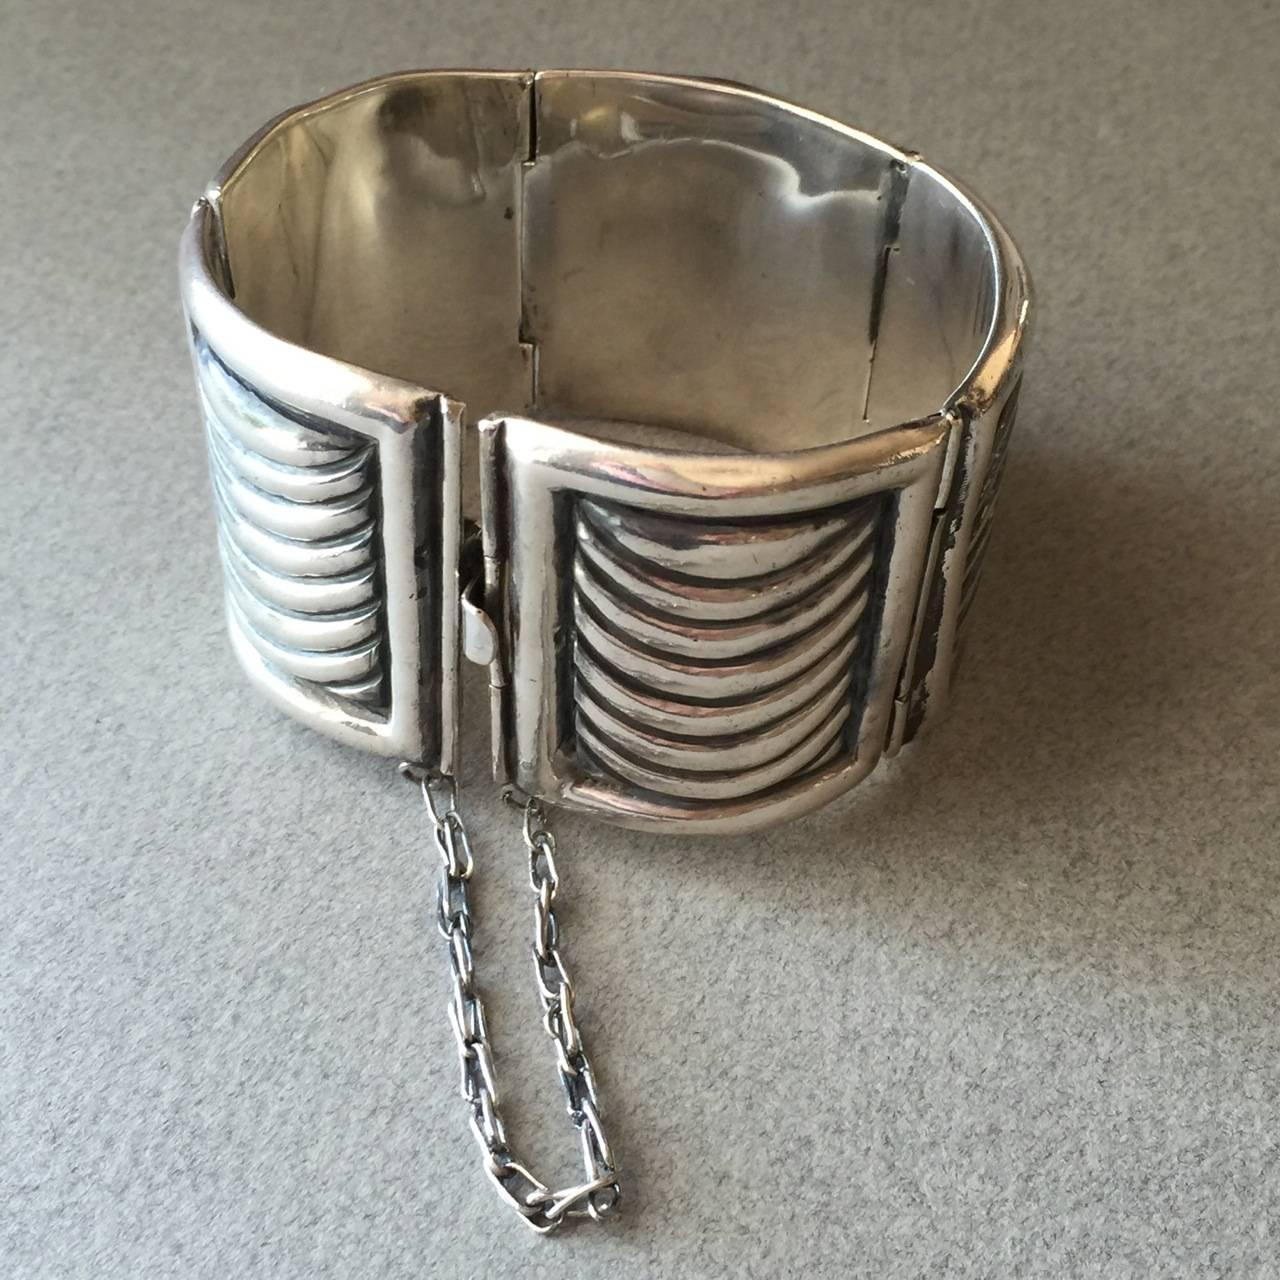 Fred Davis Sterling Silver Bracelet

This remarkable bracelet by master silversmith Fred Davis consists of five panels with curved lines connected by hinges. The hinged panels curve slightly for comfort. 

It makes a great statement on the wrist